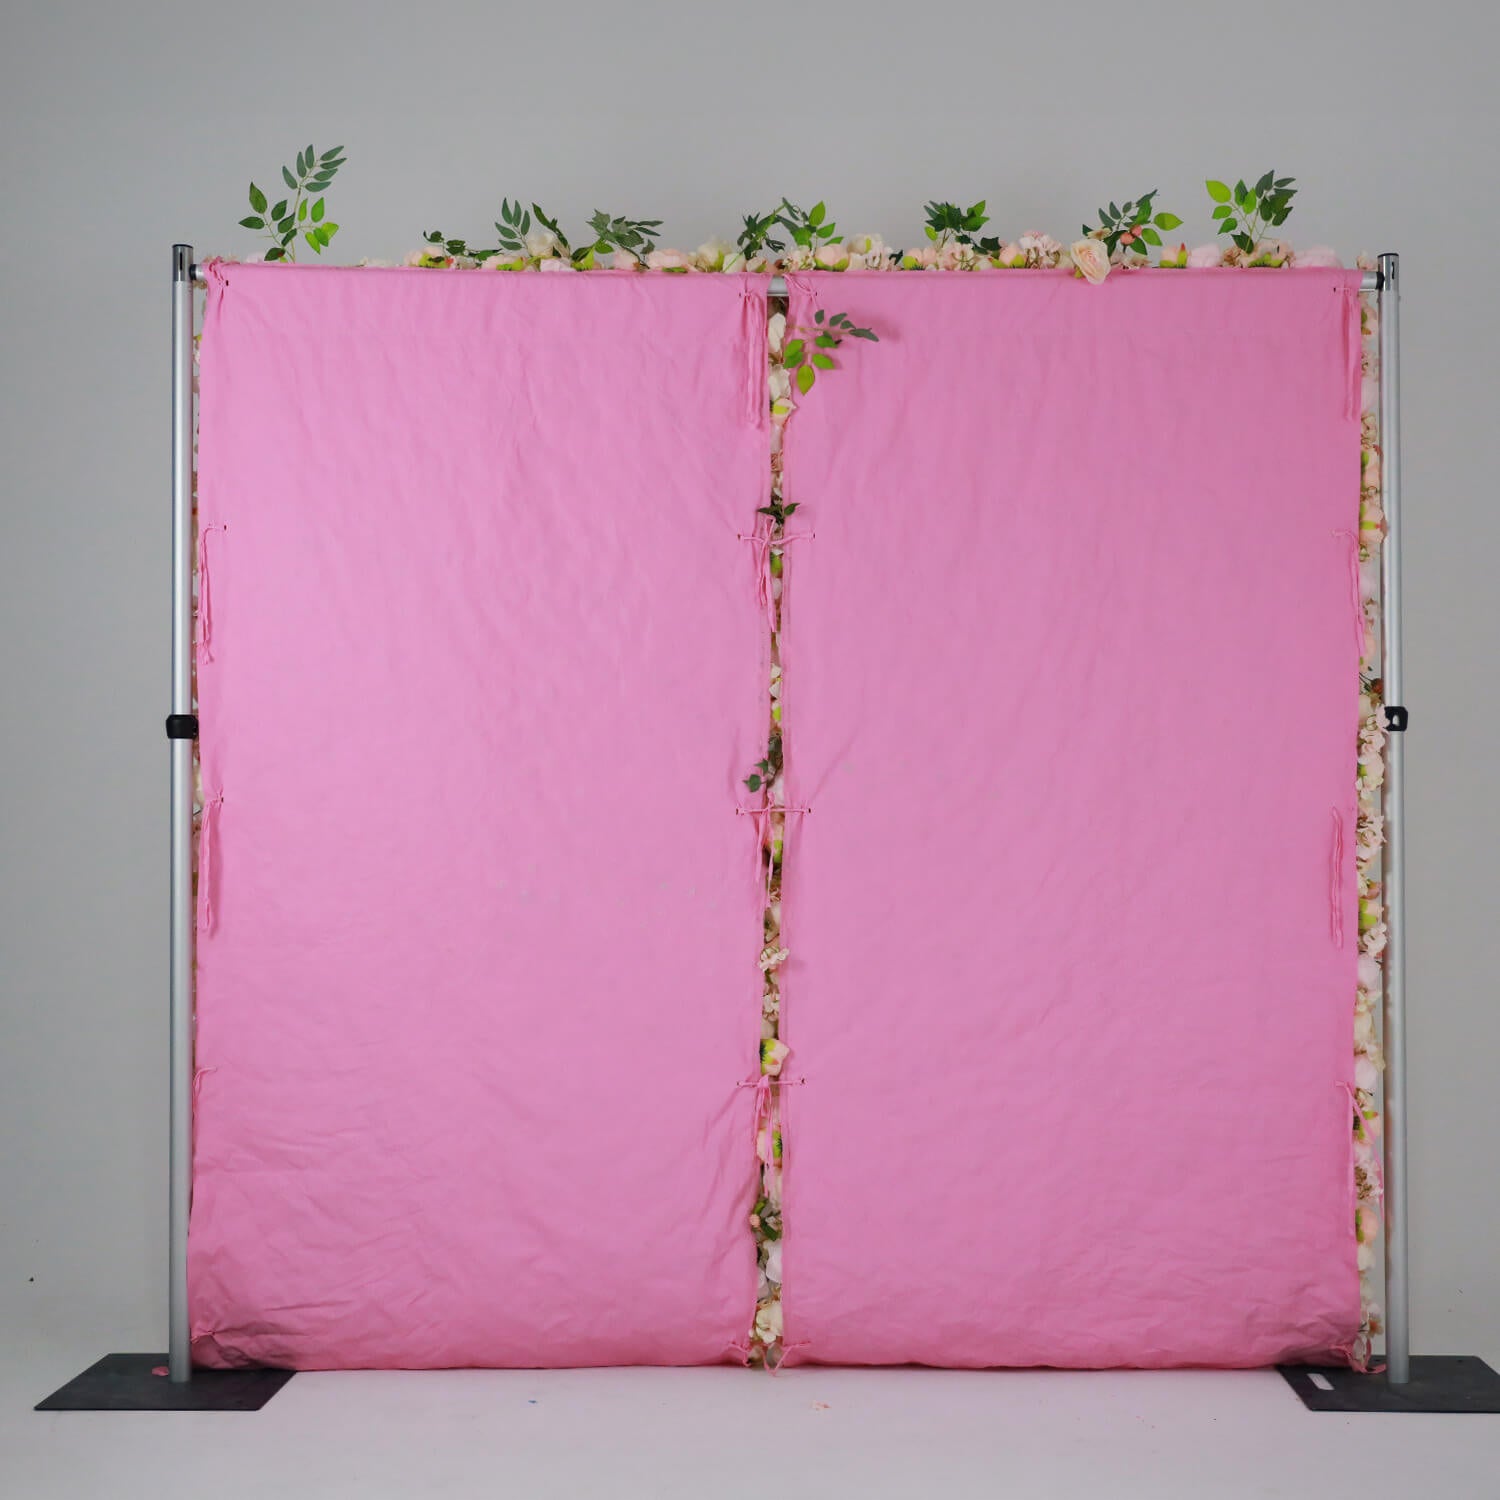 Pink roses flower wall backdrop is easy to install.